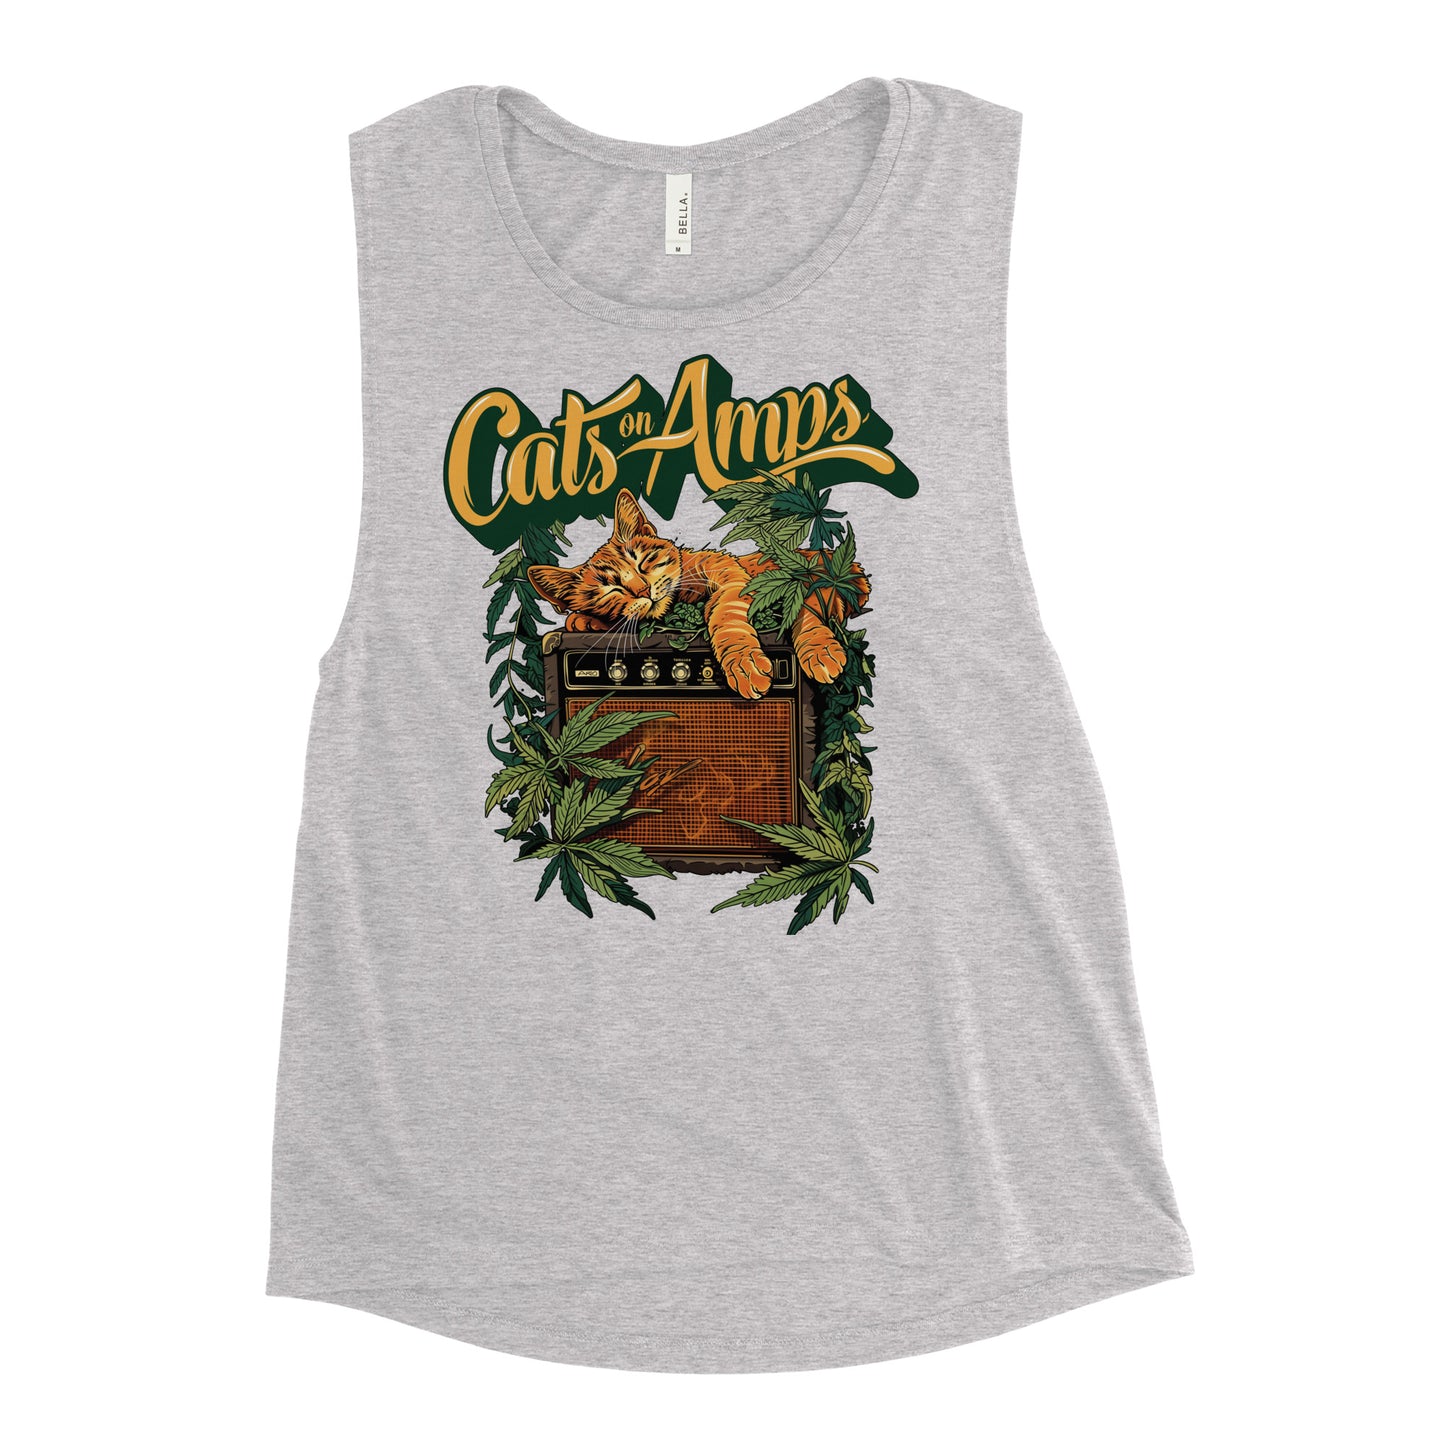 CATS ON AMPS - 420 Sleeper - Ladies’ Muscle Tank